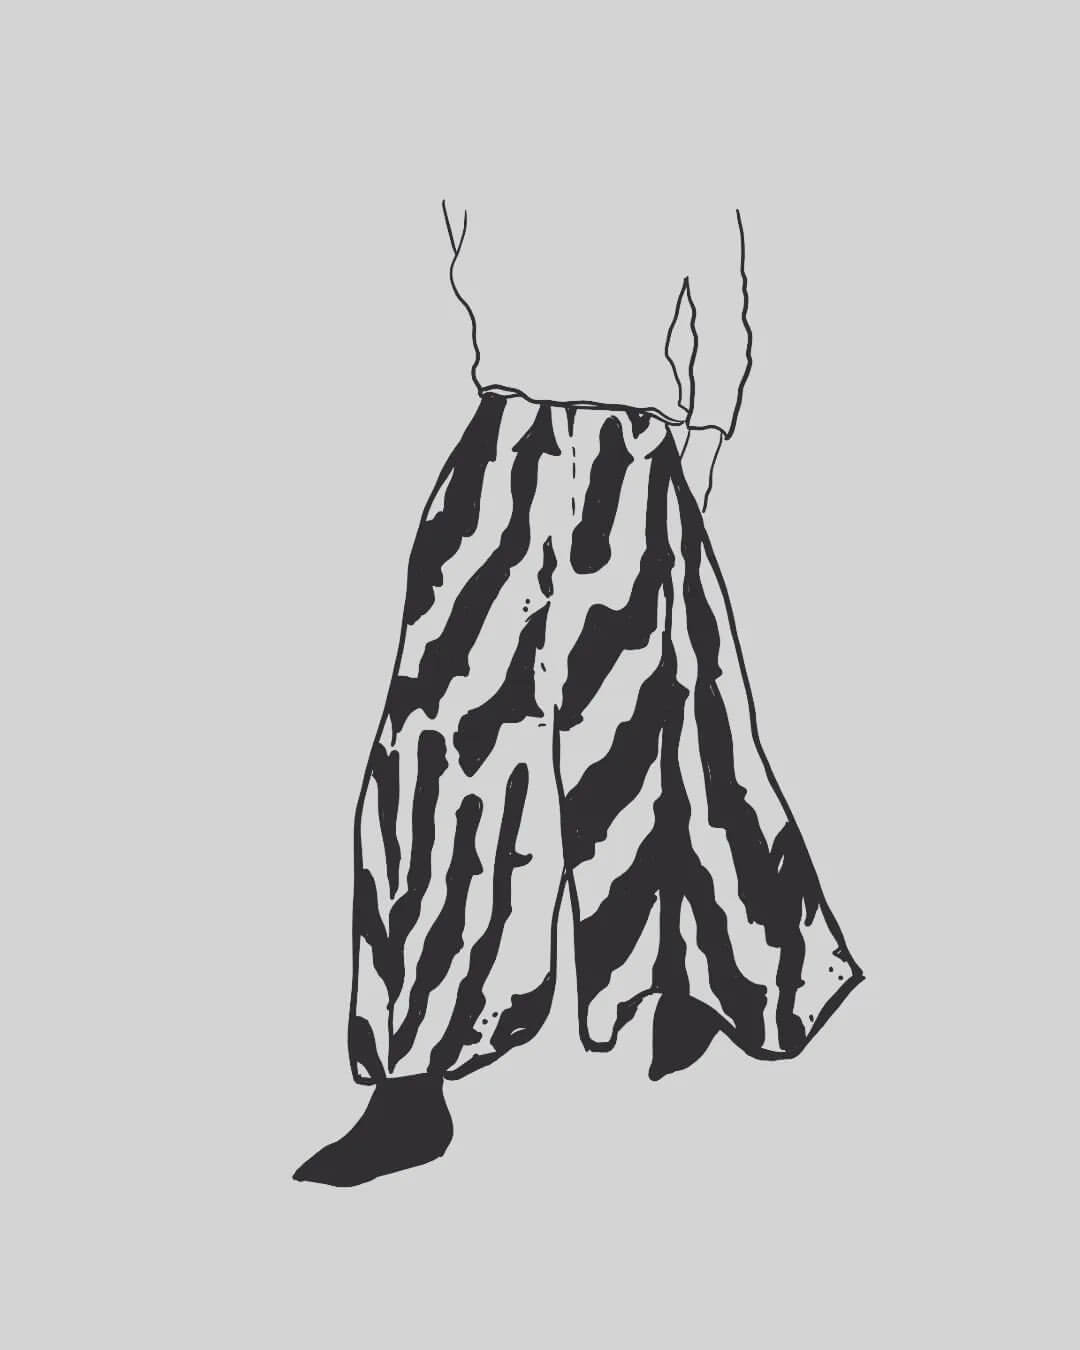 9. Black and white marker drawing of a person wearing zebra print pants and black ankle boots.